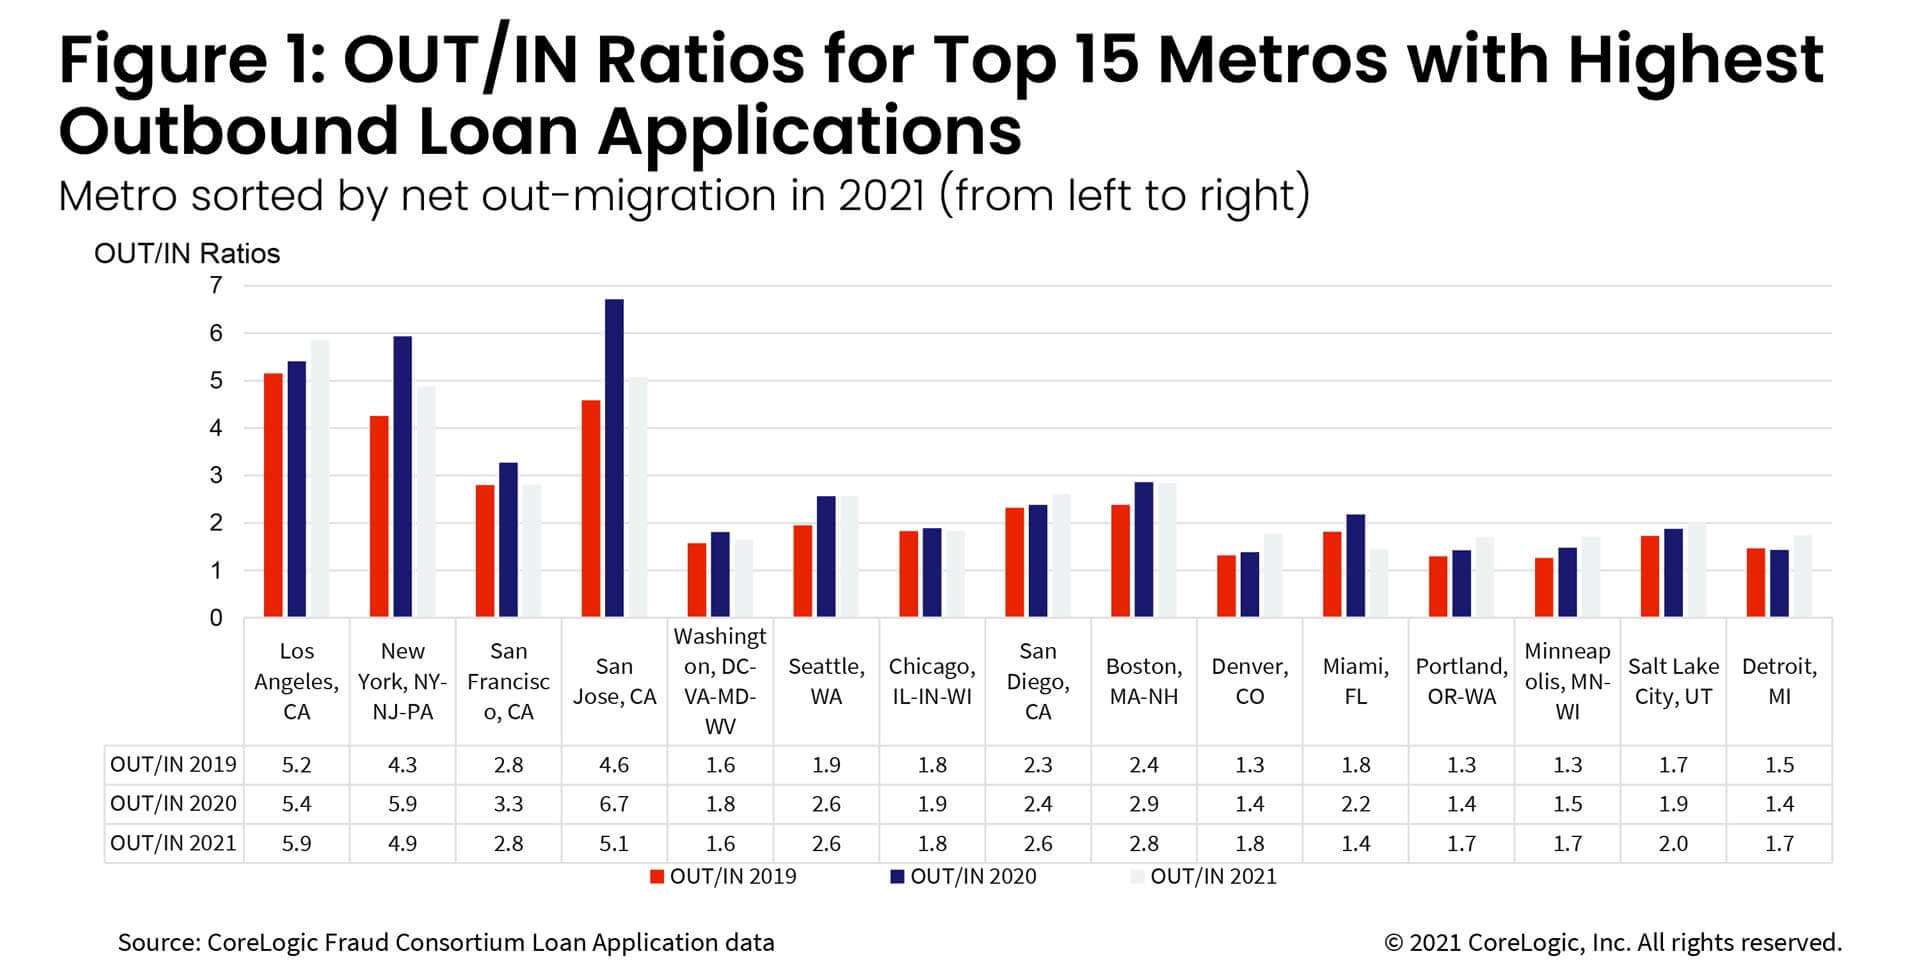 Figure 1. OUT/IN Ratios for Top 15 Metros with Highest Outbound Loan Applications 